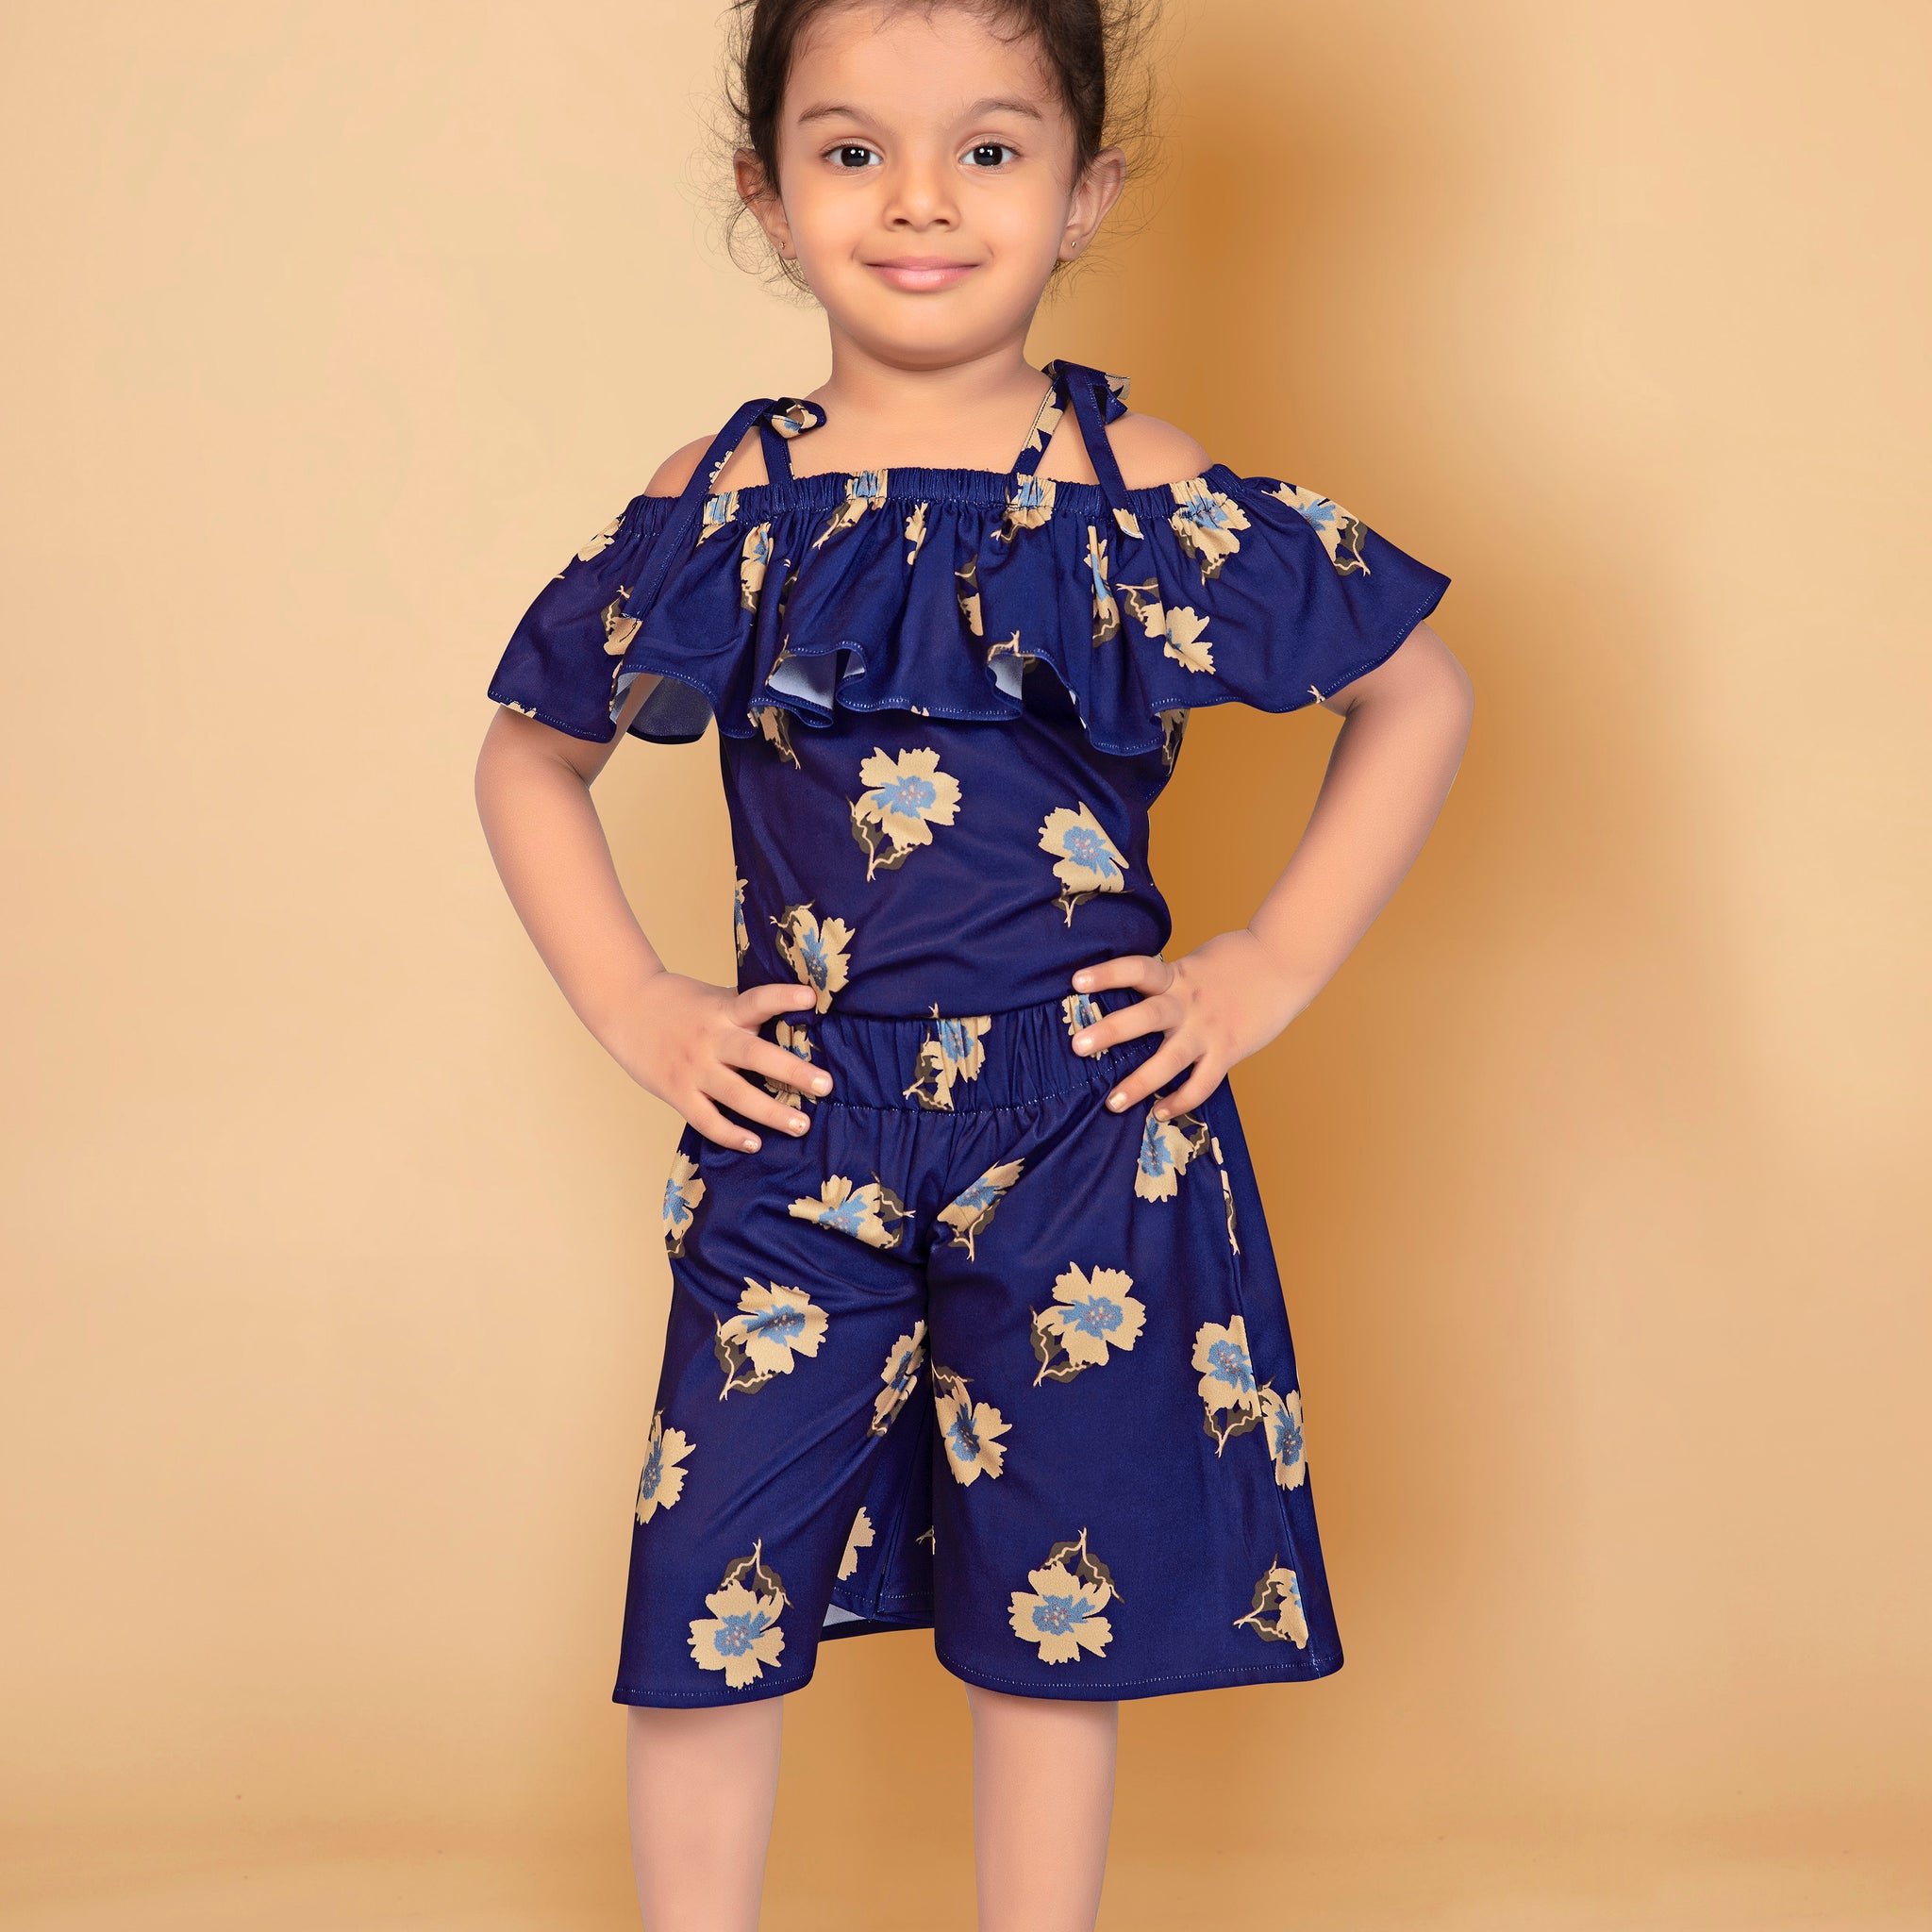 Toddler Girl's Floral Printed Top and Short Set